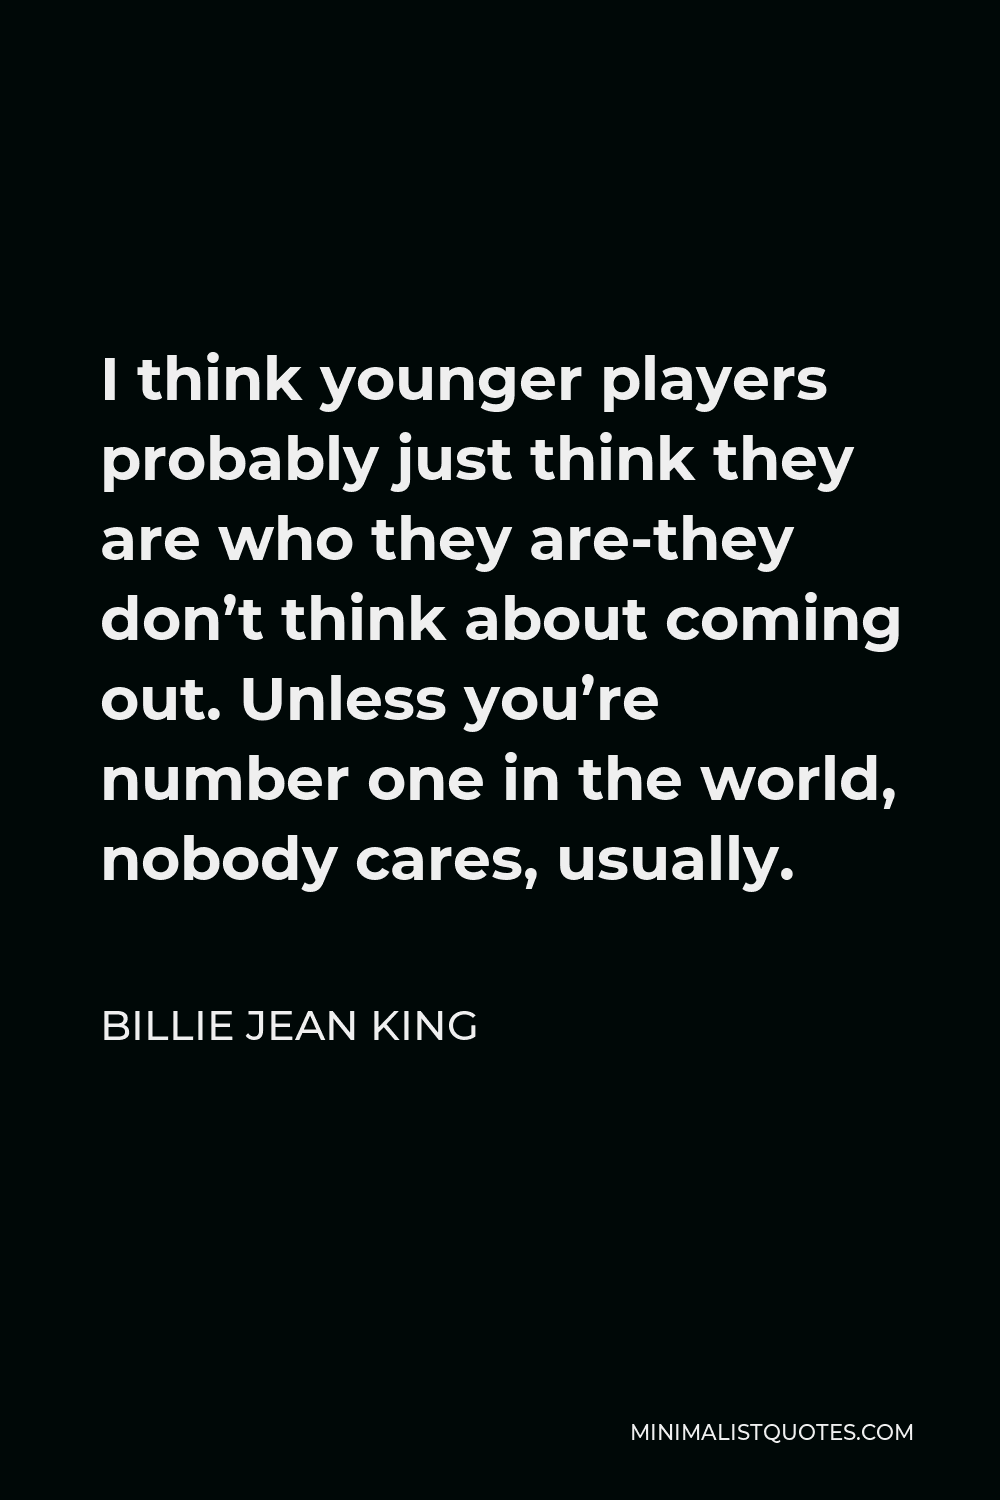 Billie Jean King Quote - I think younger players probably just think they are who they are-they don’t think about coming out. Unless you’re number one in the world, nobody cares, usually.